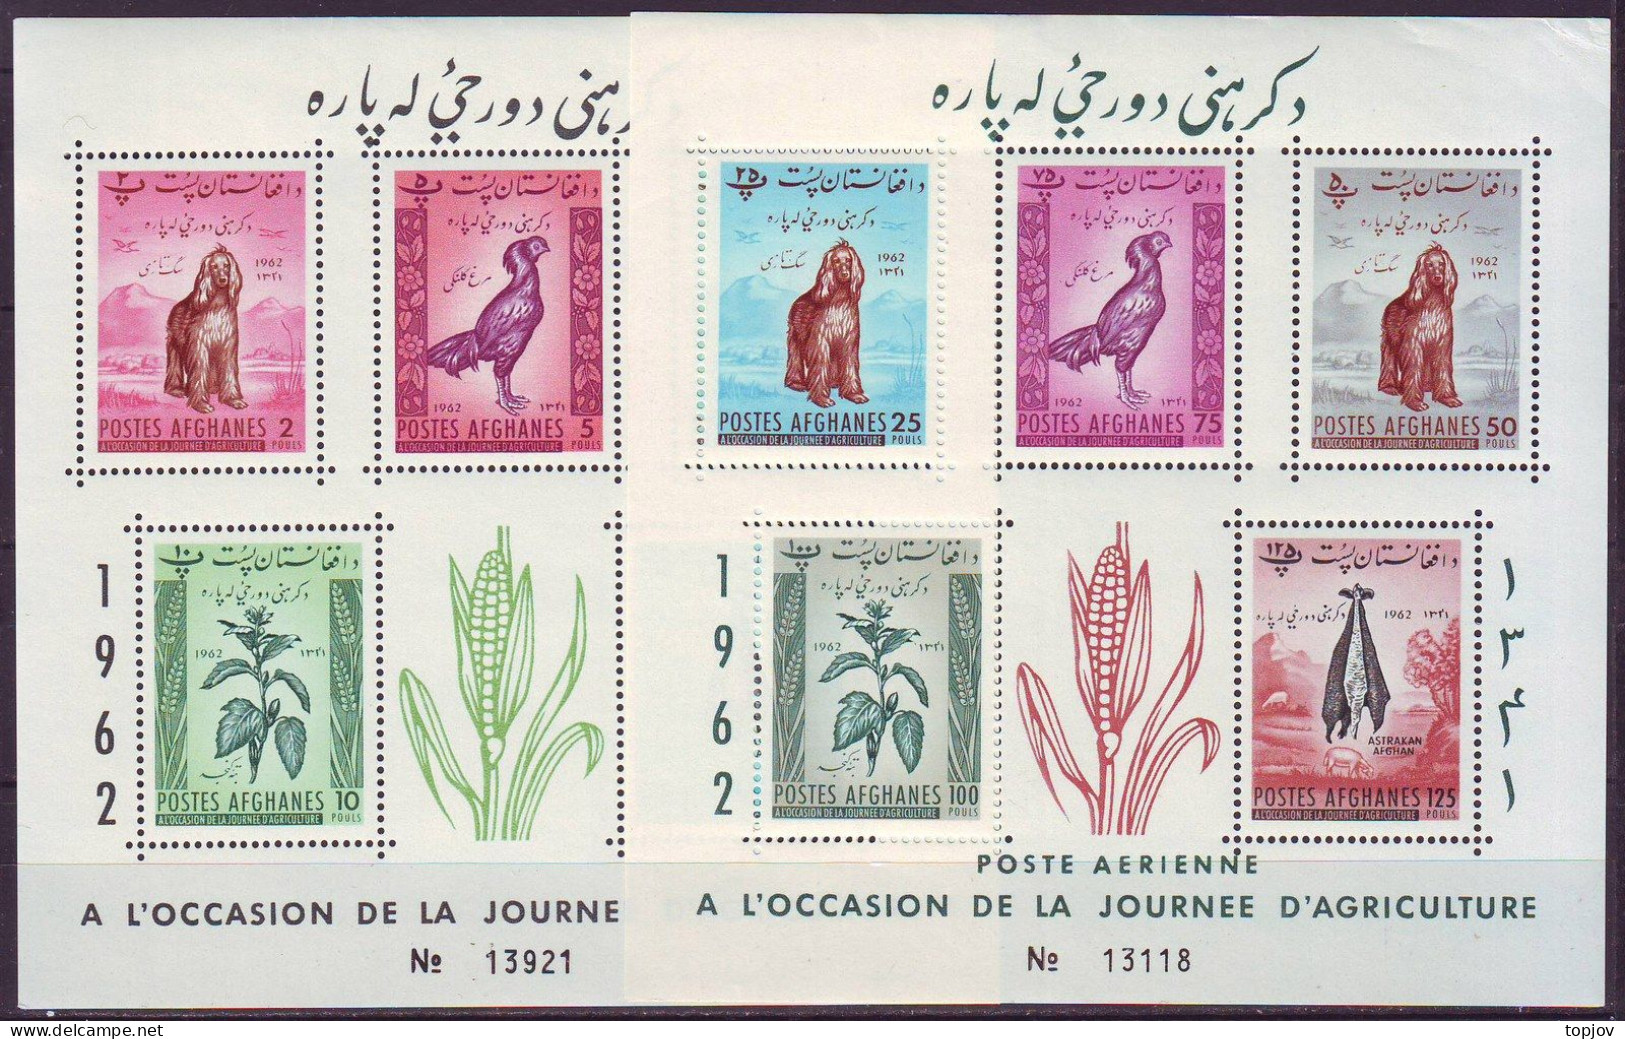 AFGHANISTAN - AGRICULTURE DAY - PERF.+ IMPERF DOG ASTRAKAN PHEASANT CORN - 4MS - **MNH - 1962 - Fattoria